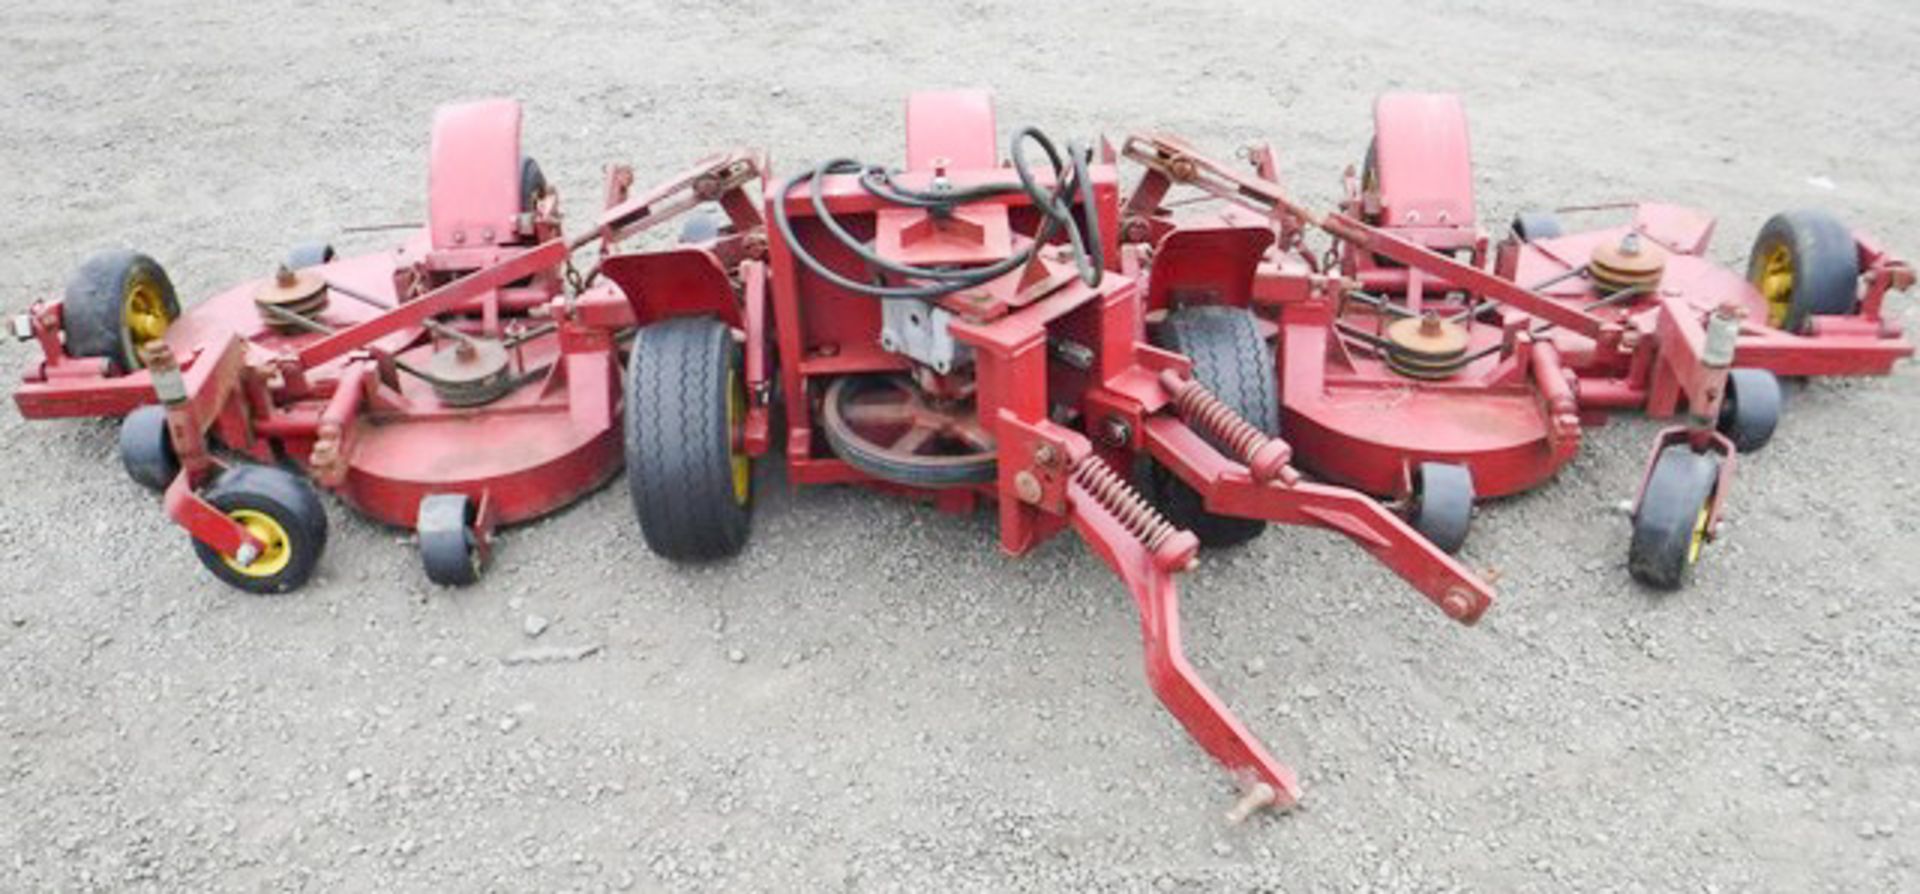 LASTEC ARTICULATOR, 7 DECKED PTO DRIVEN GRASS CUTTER WITH HYDRAULIC LIFT - Image 4 of 9